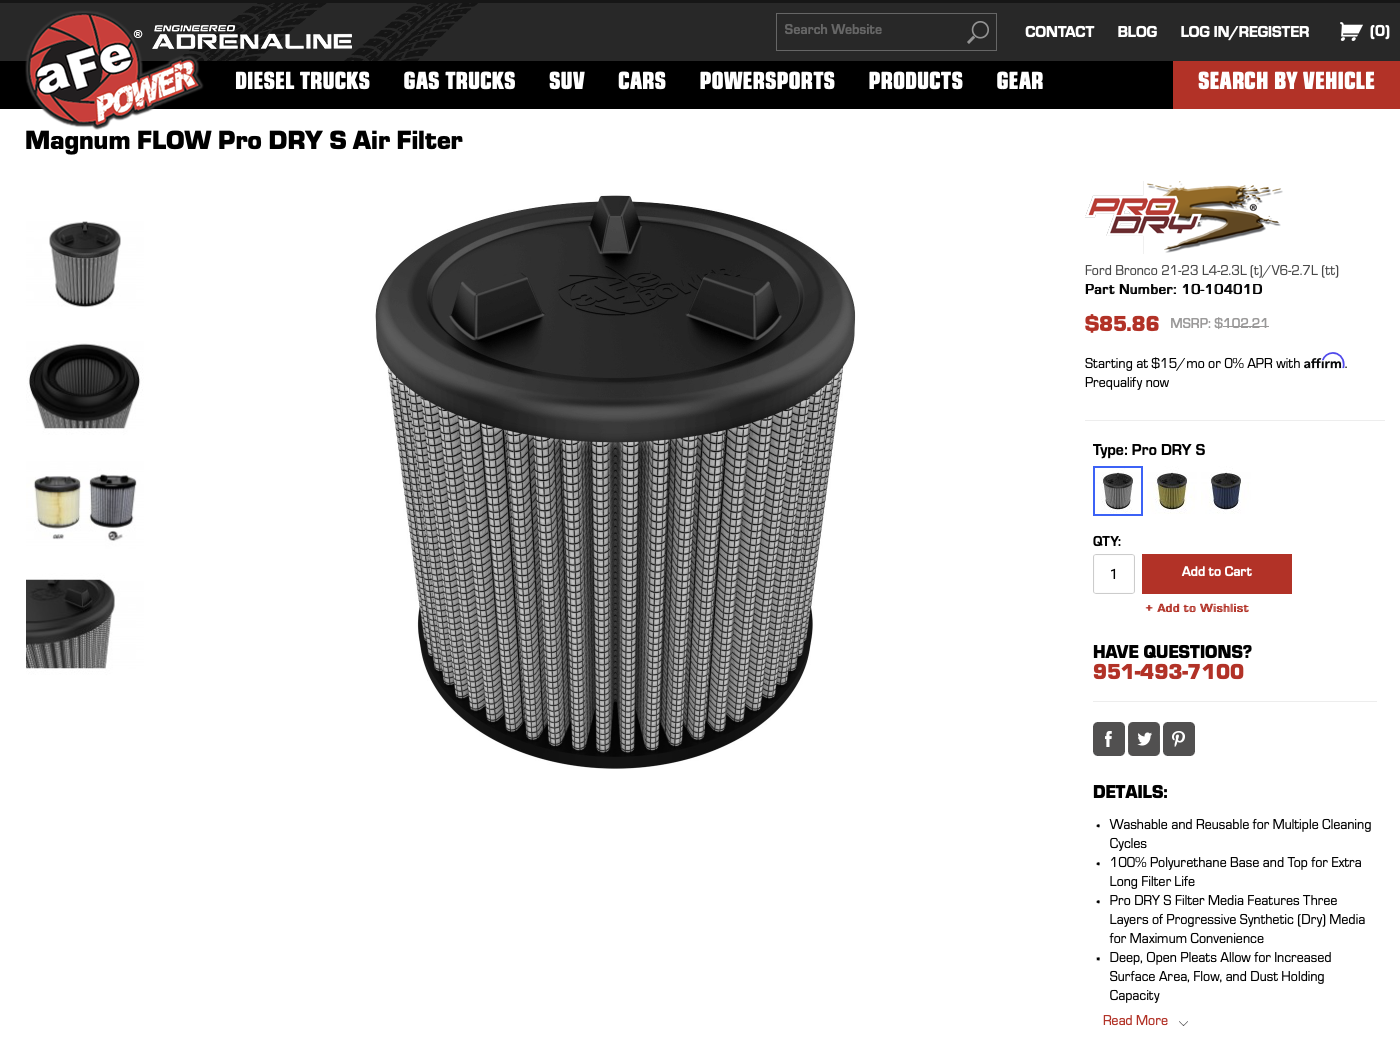 Ford Bronco S&B Dry Air Filter Review Screenshot 2023-08-04 at 10.01.36 AM